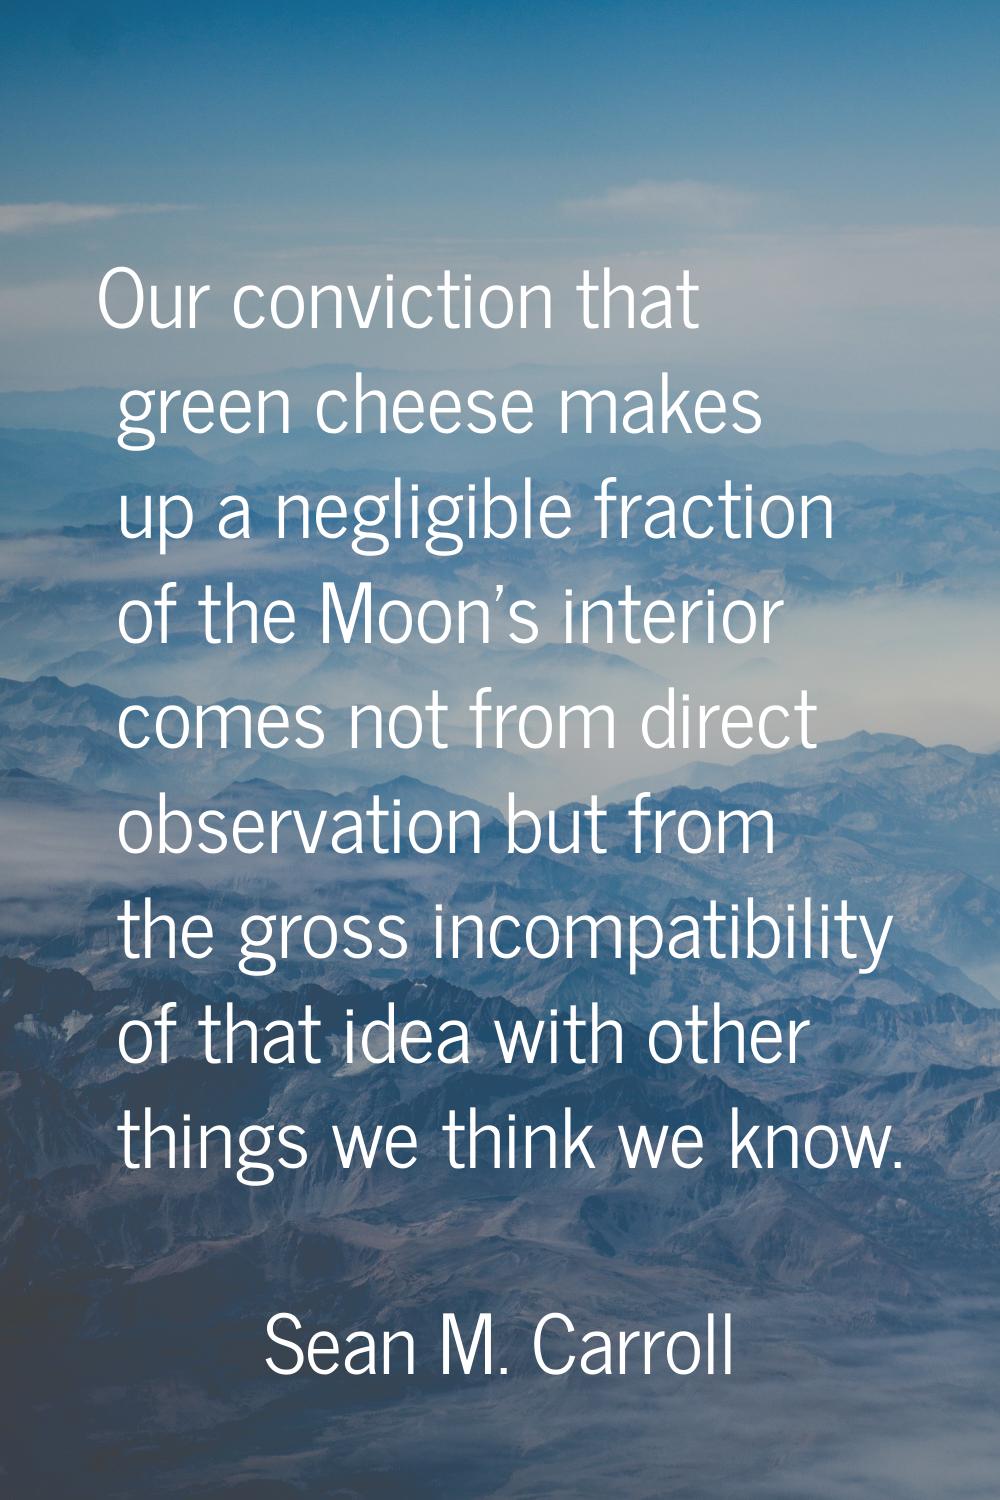 Our conviction that green cheese makes up a negligible fraction of the Moon's interior comes not fr